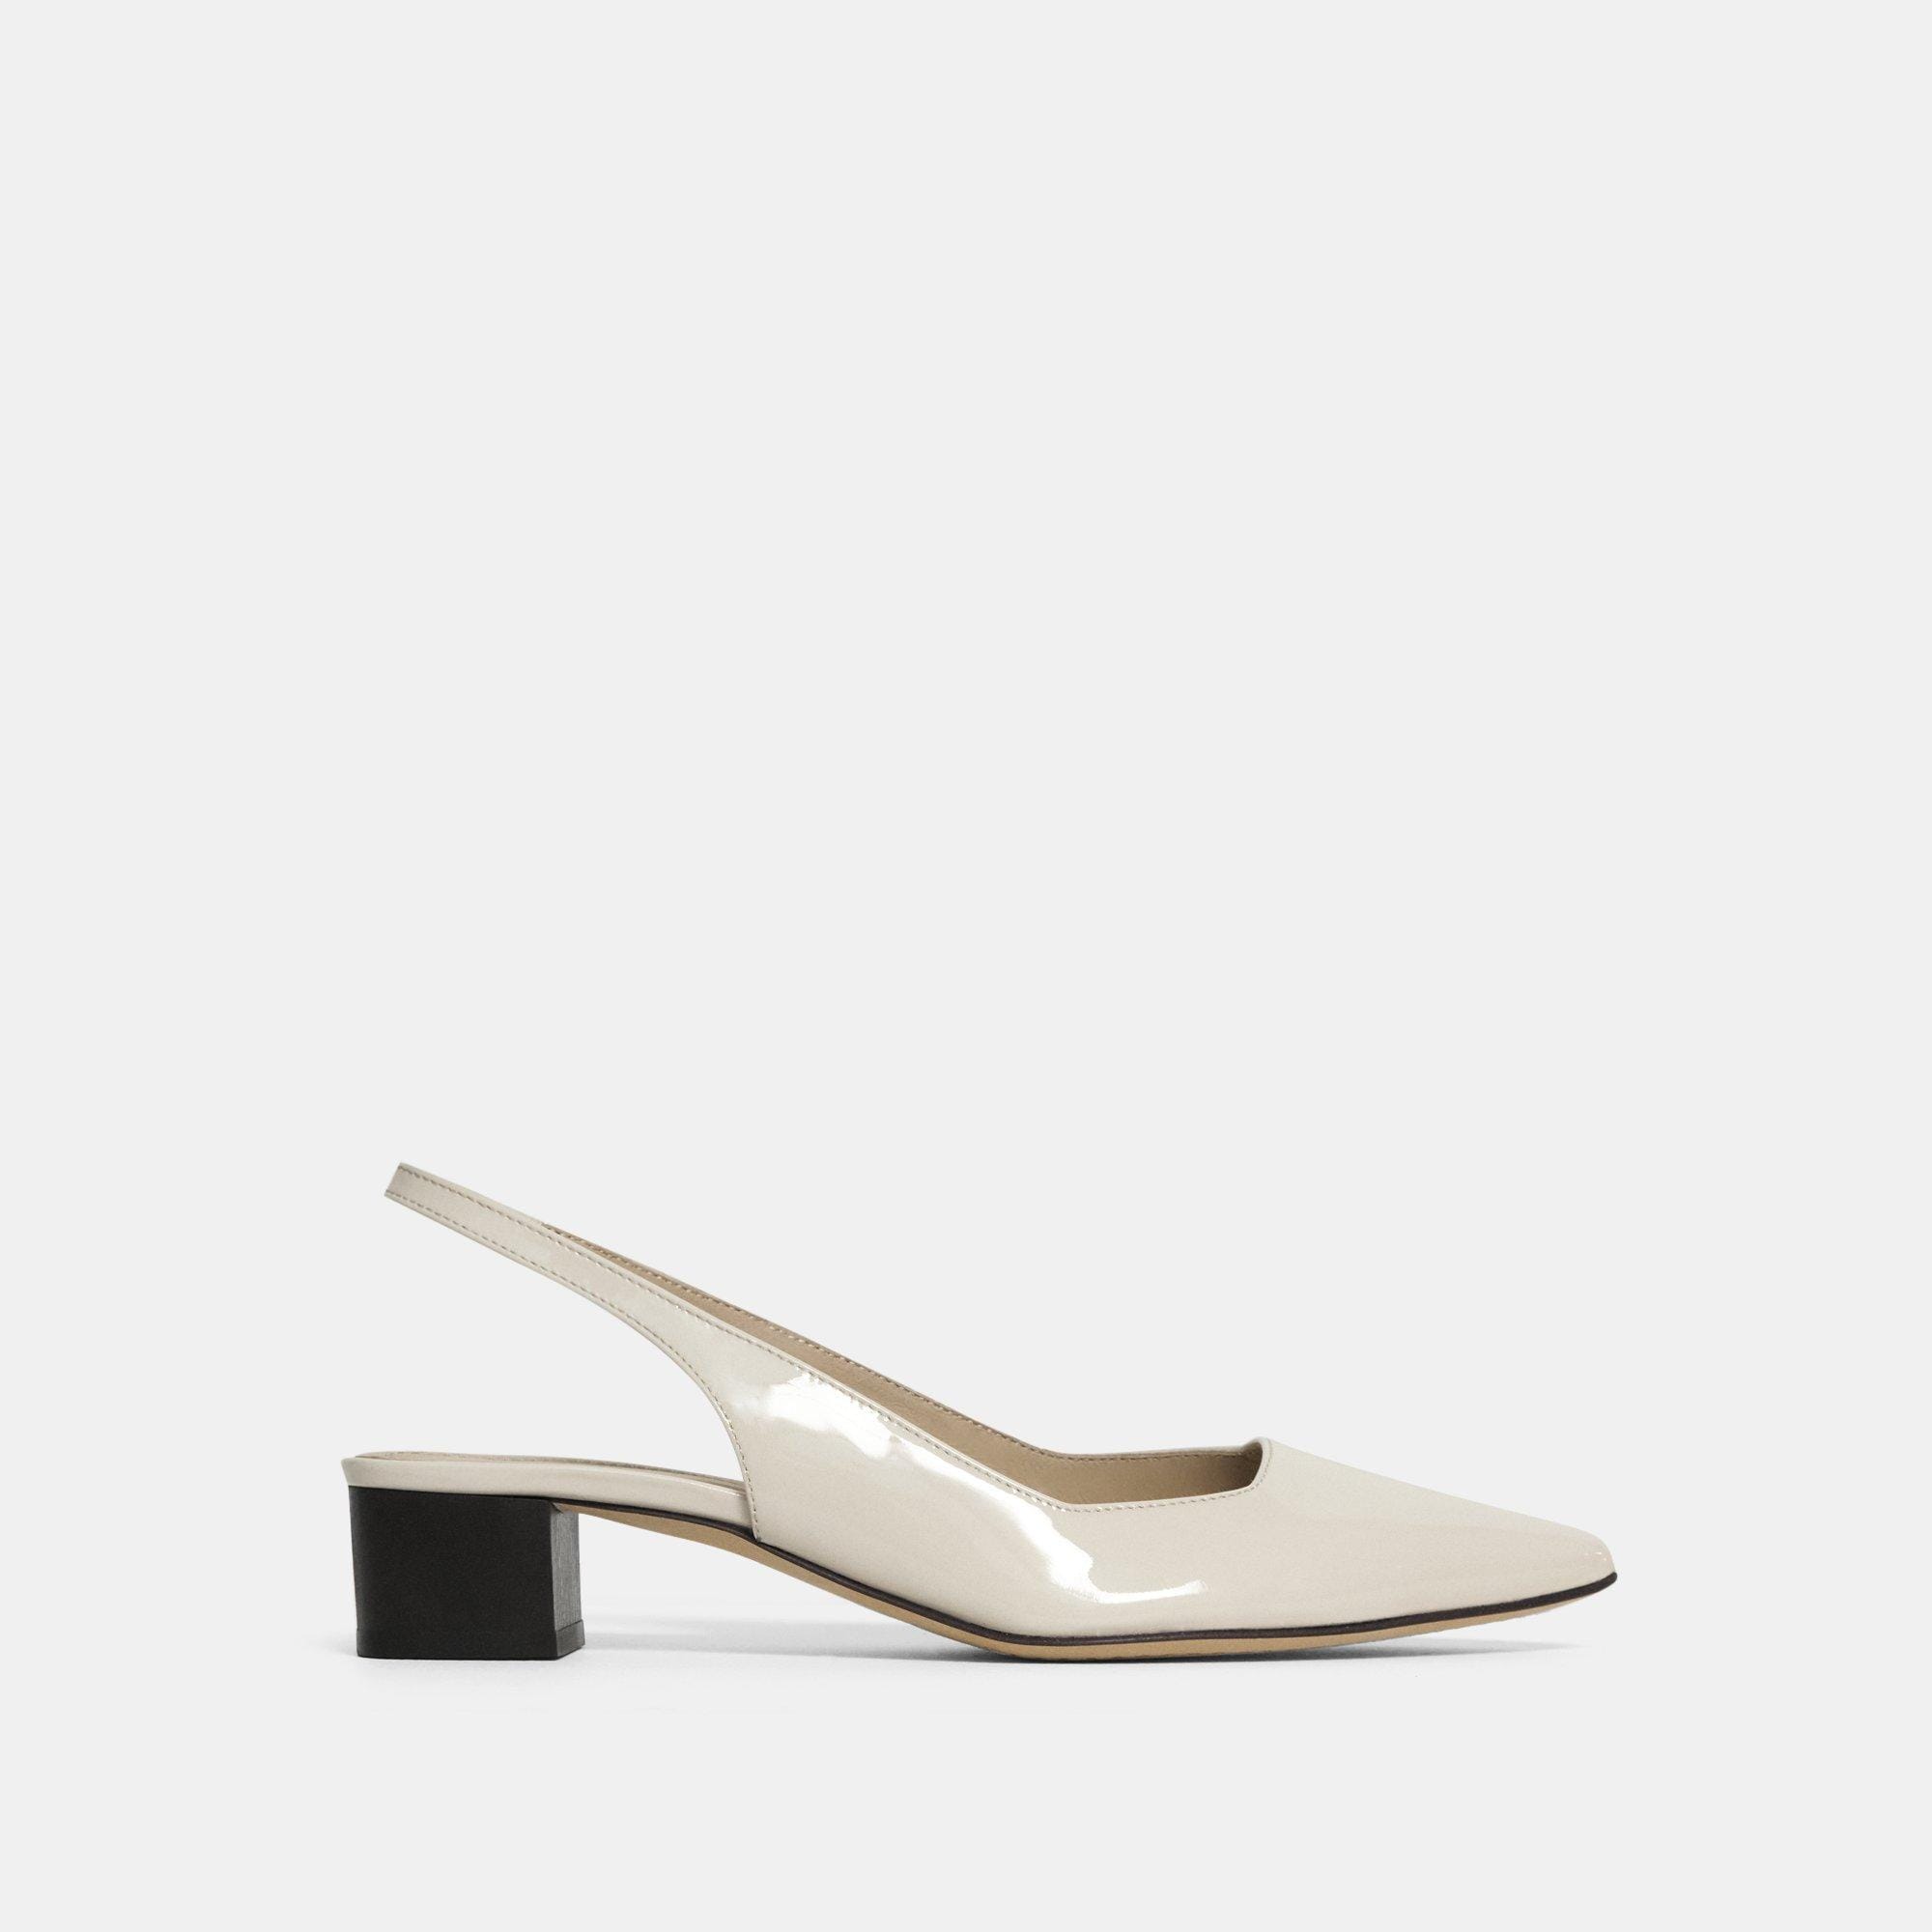 Theory Block Heel Slingback in Patent Leather